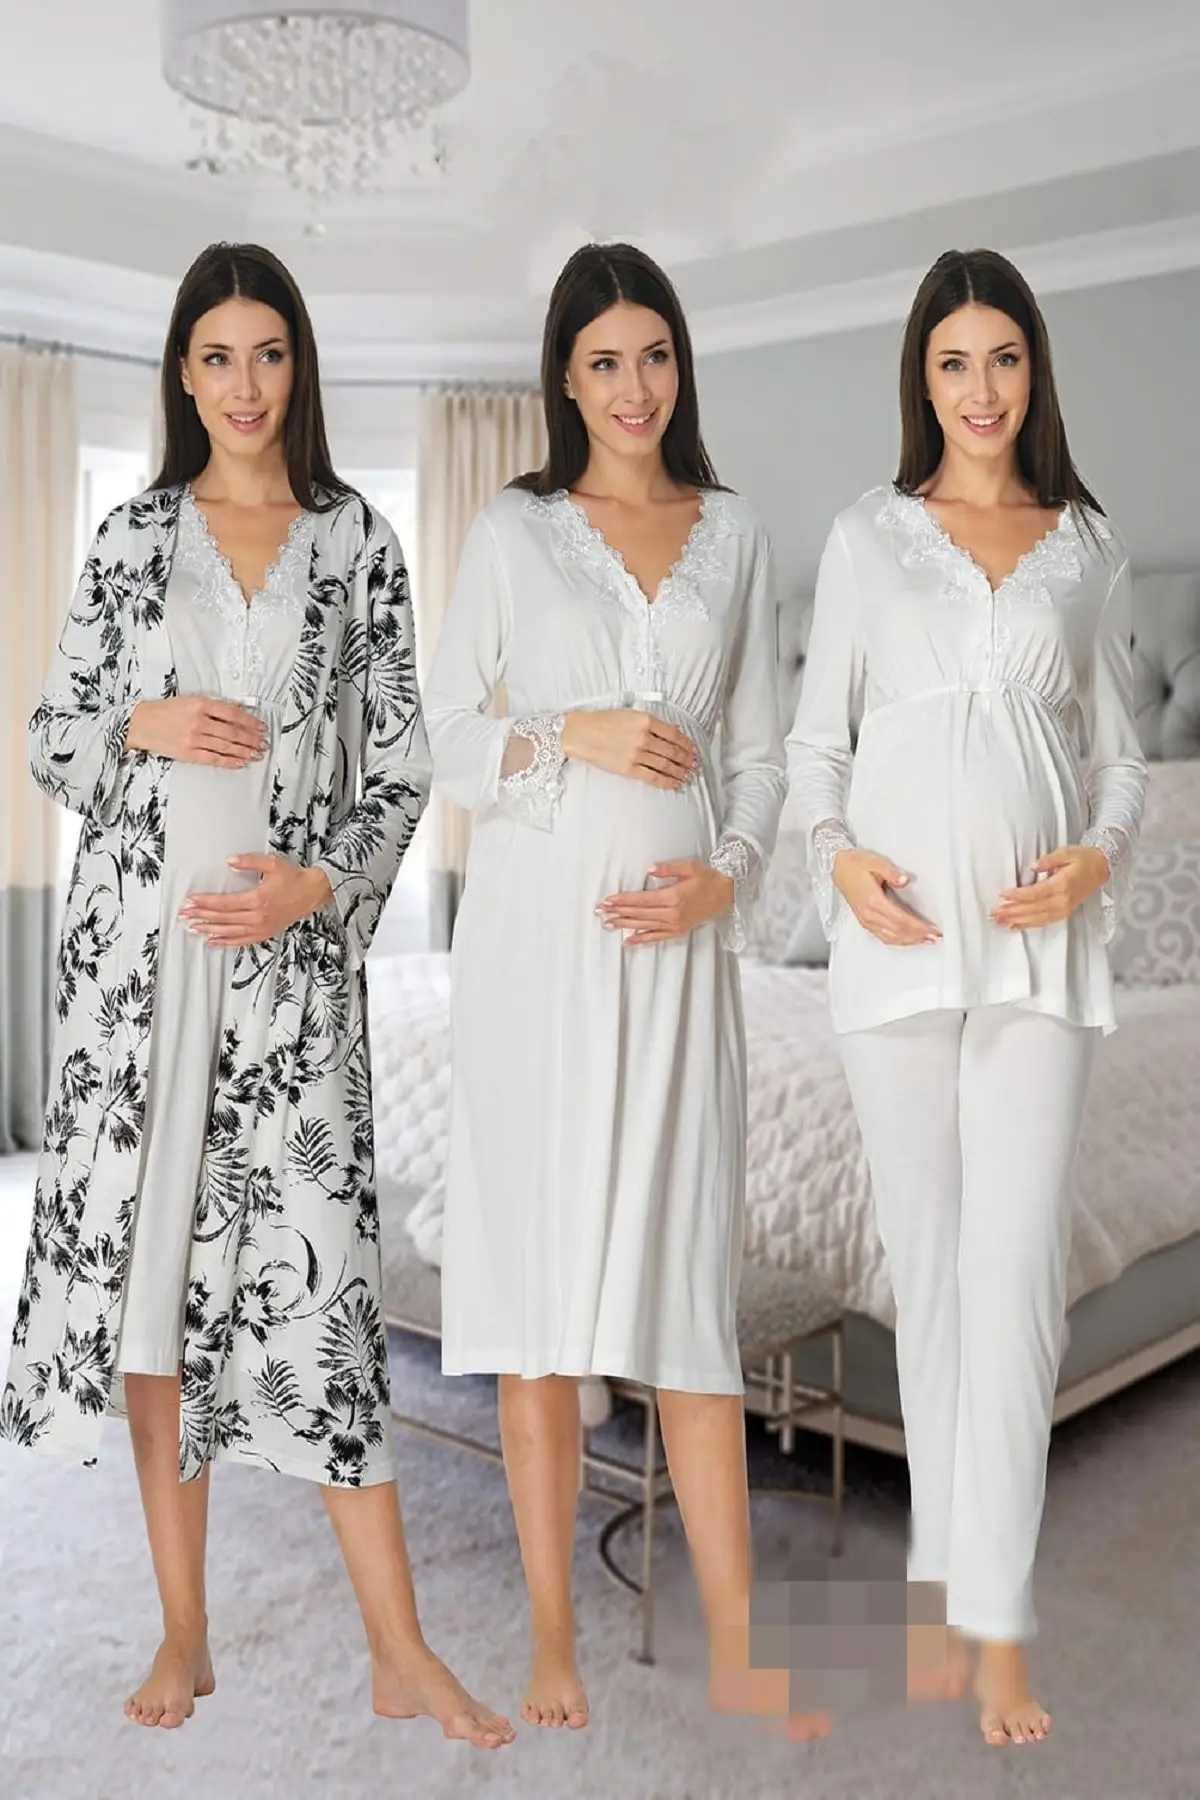 Effort Pajamas Women Long Sleeve Pajamas Set Nightgown Dressing Gown Maternity Pregnant 4 Pieces White Red Navy Blue enlarge